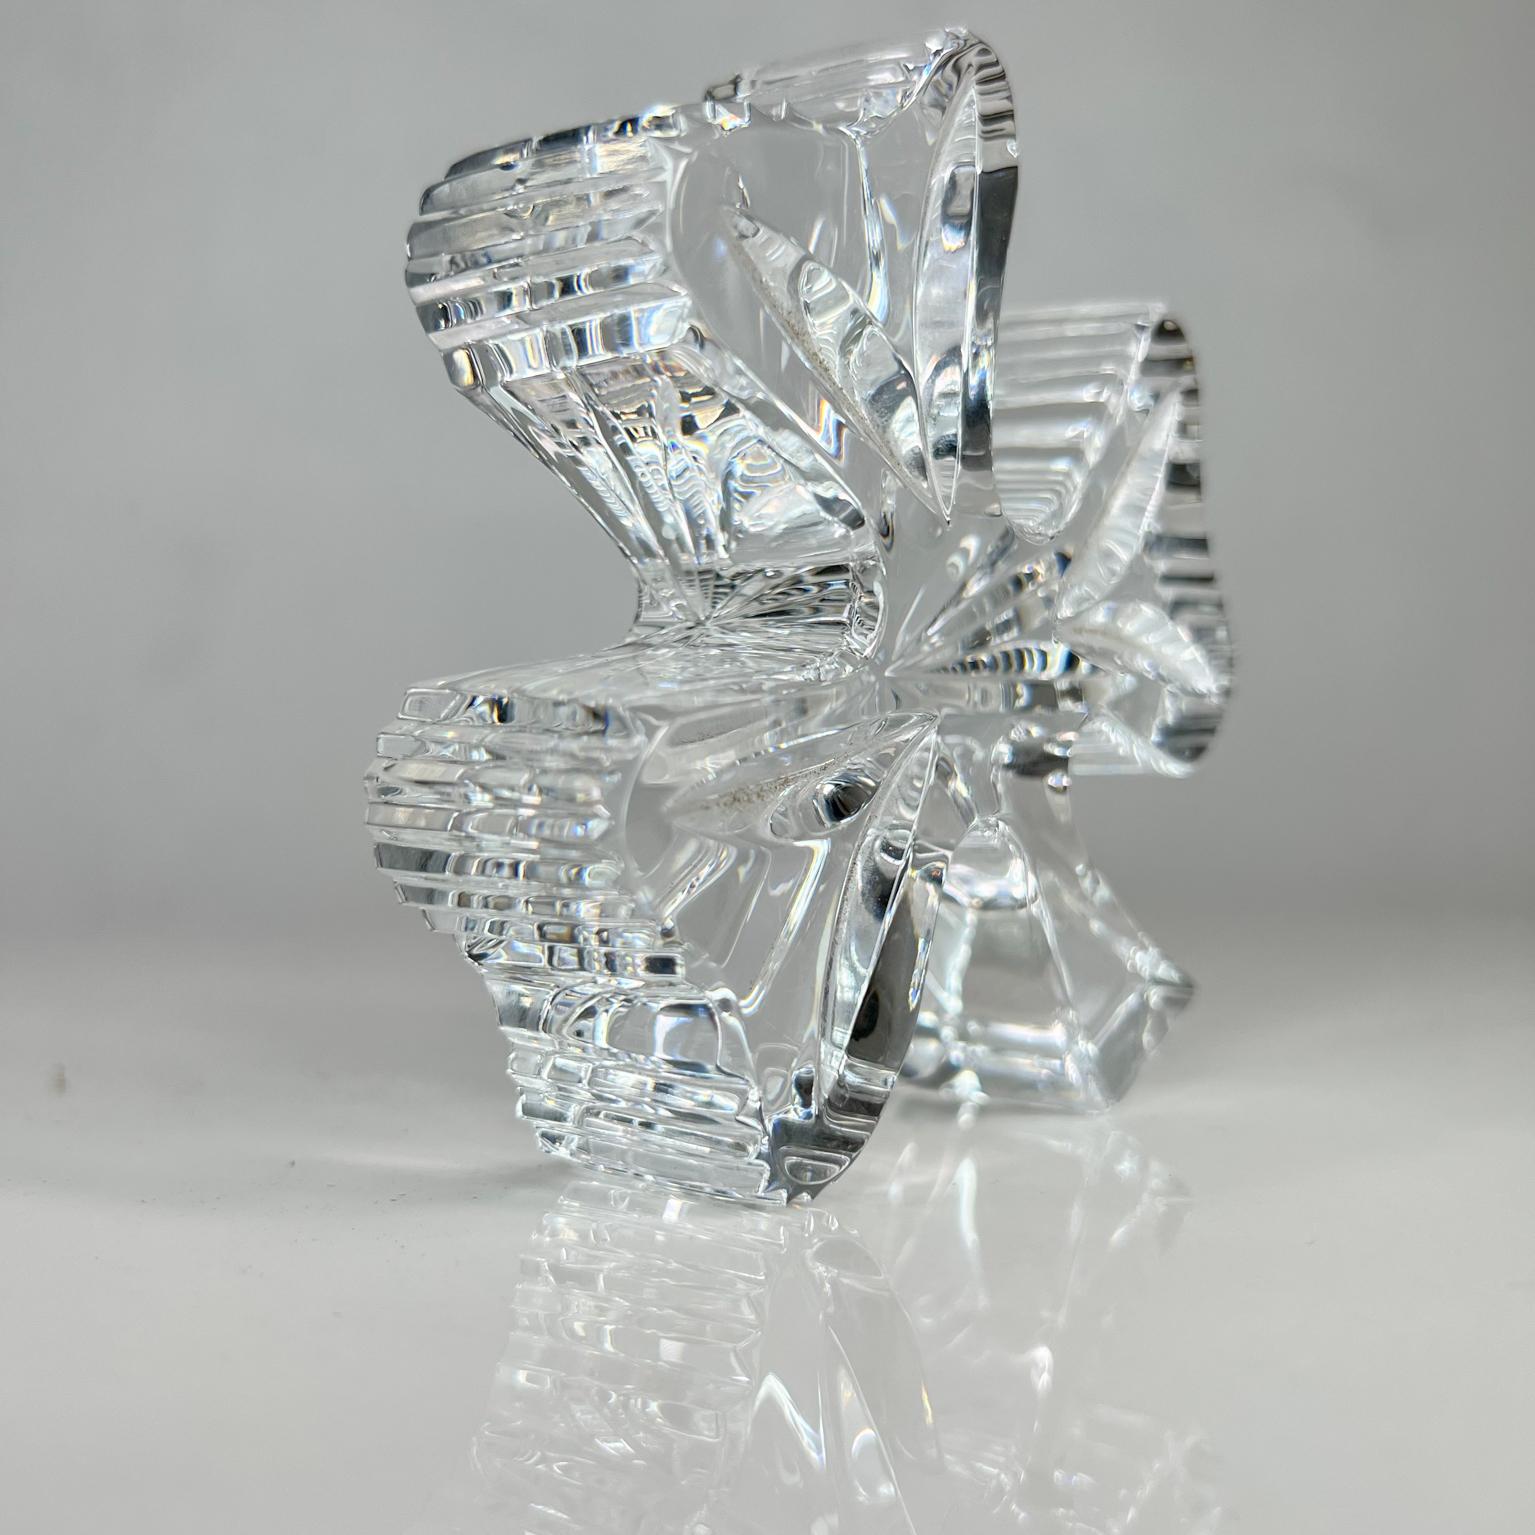 Shamrock paperweight.
1980s Lovely waterford crystal glass lucky Irish Shamrock paperweight. 
Maker stamped Waterford made in Ireland.
Preowned very good vintage condition.
Please see images provided.
approximately 4 H x 4 W x 1 inch D.